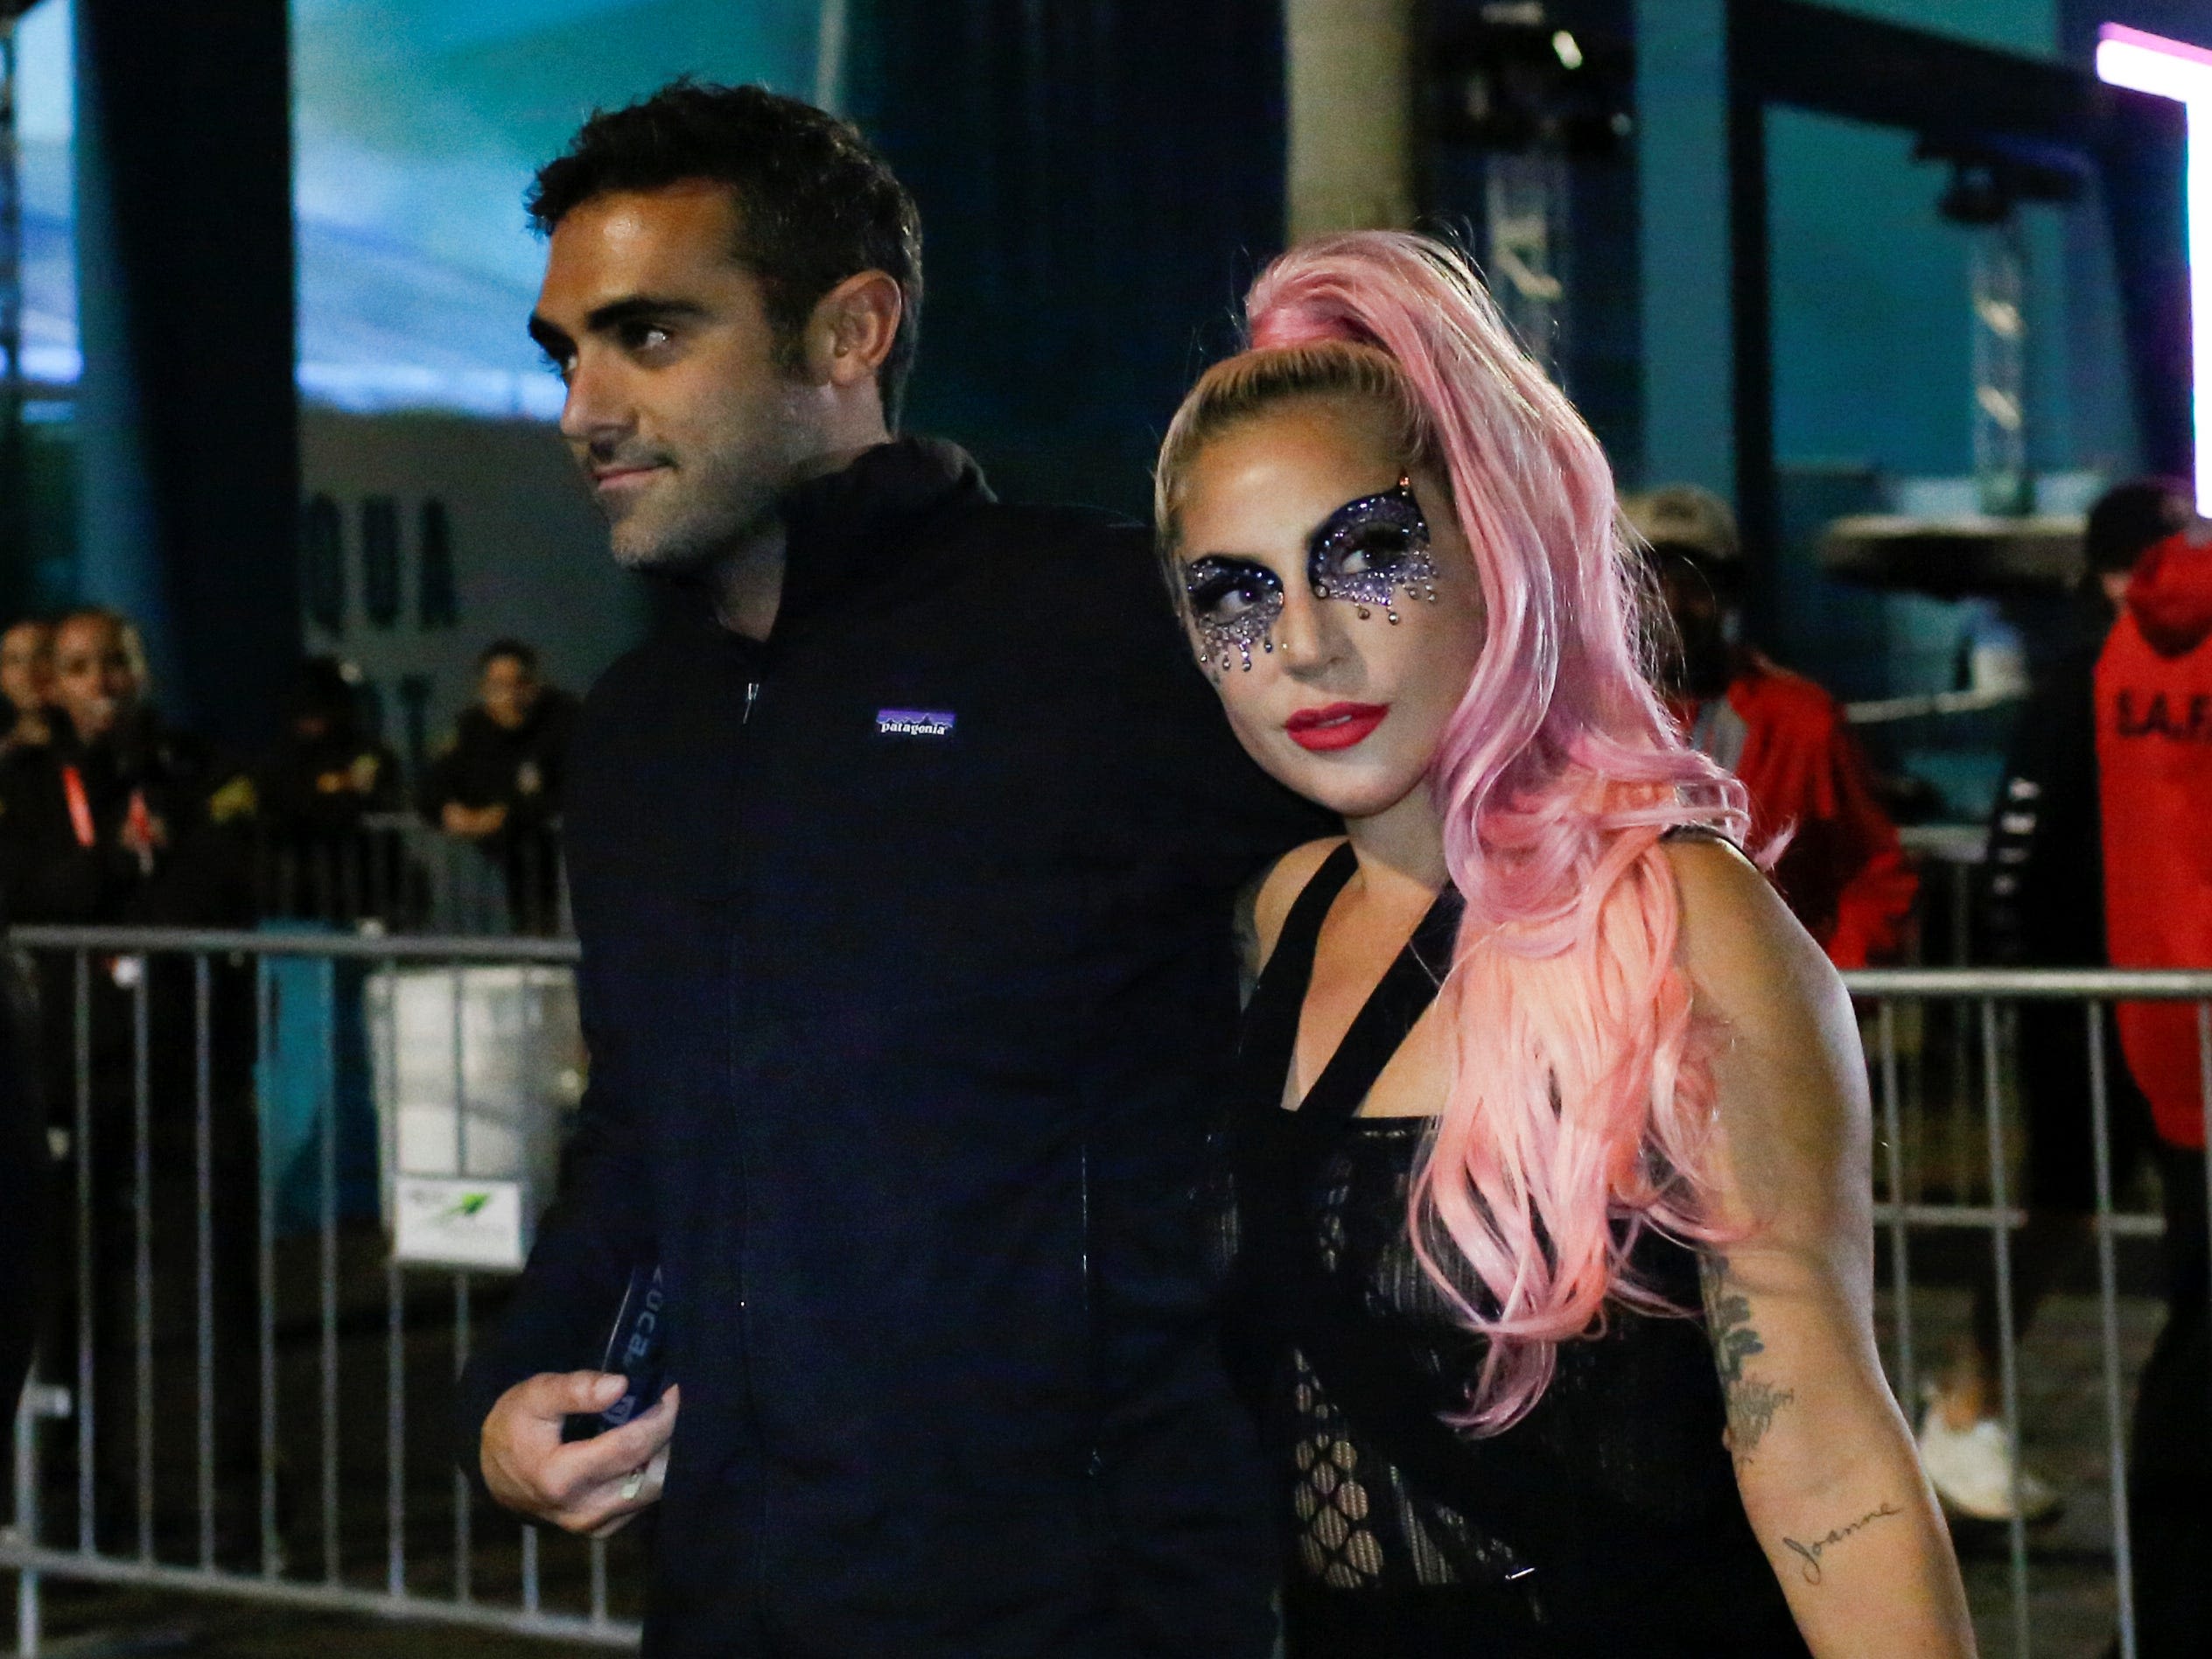 Lady Gaga's fiancé is a tech CEO who went to Harvard with Mark Zuckerberg